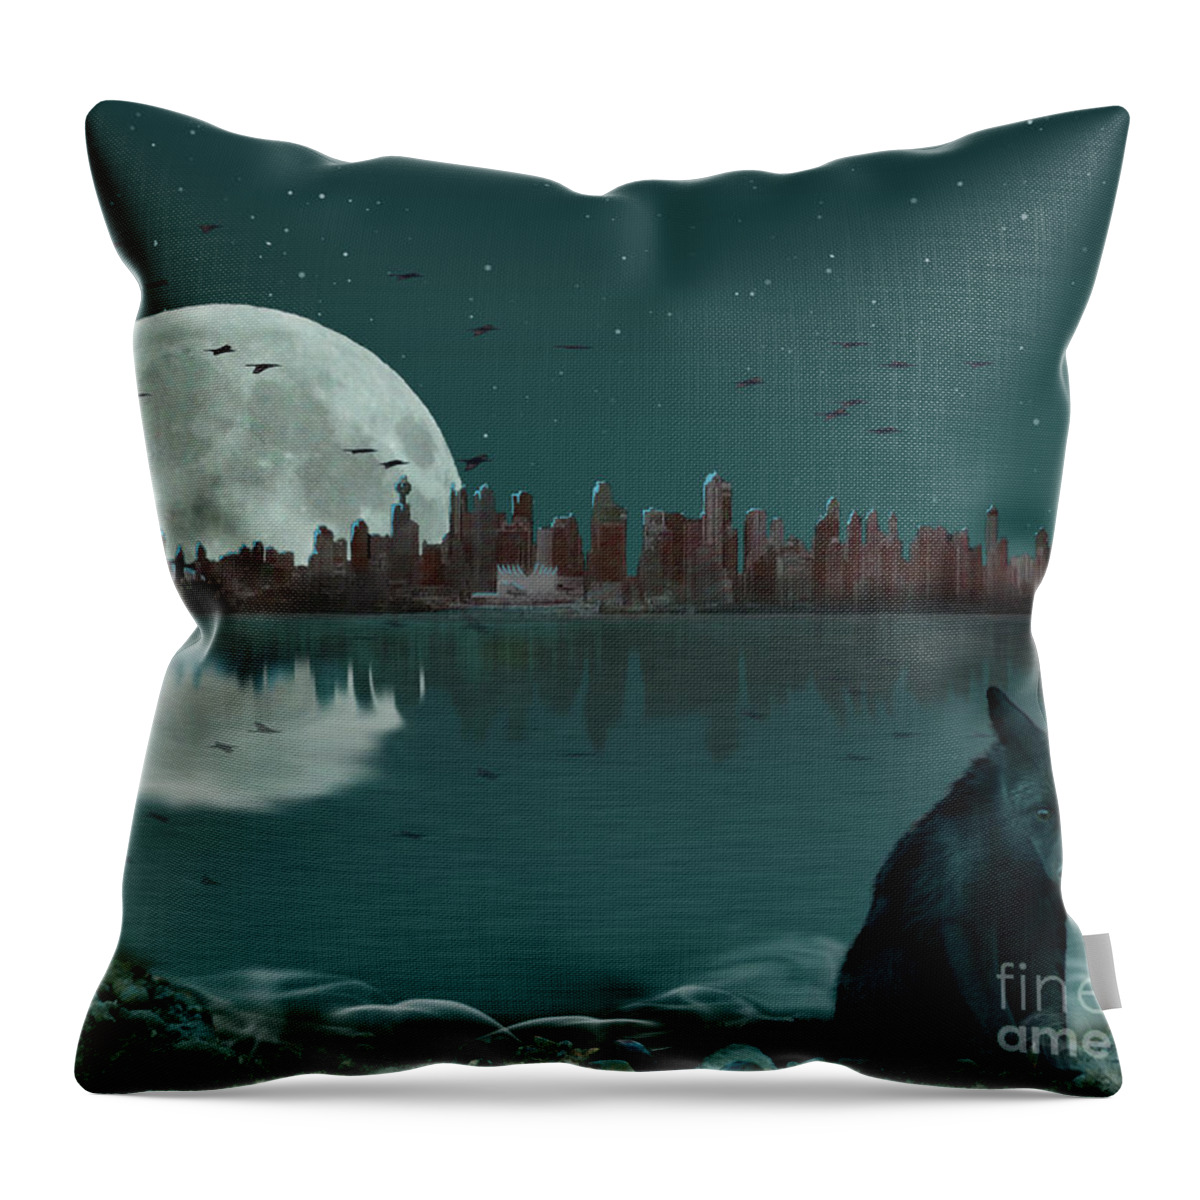 Moon Throw Pillow featuring the photograph Explore By Moonlight by Vivian Martin